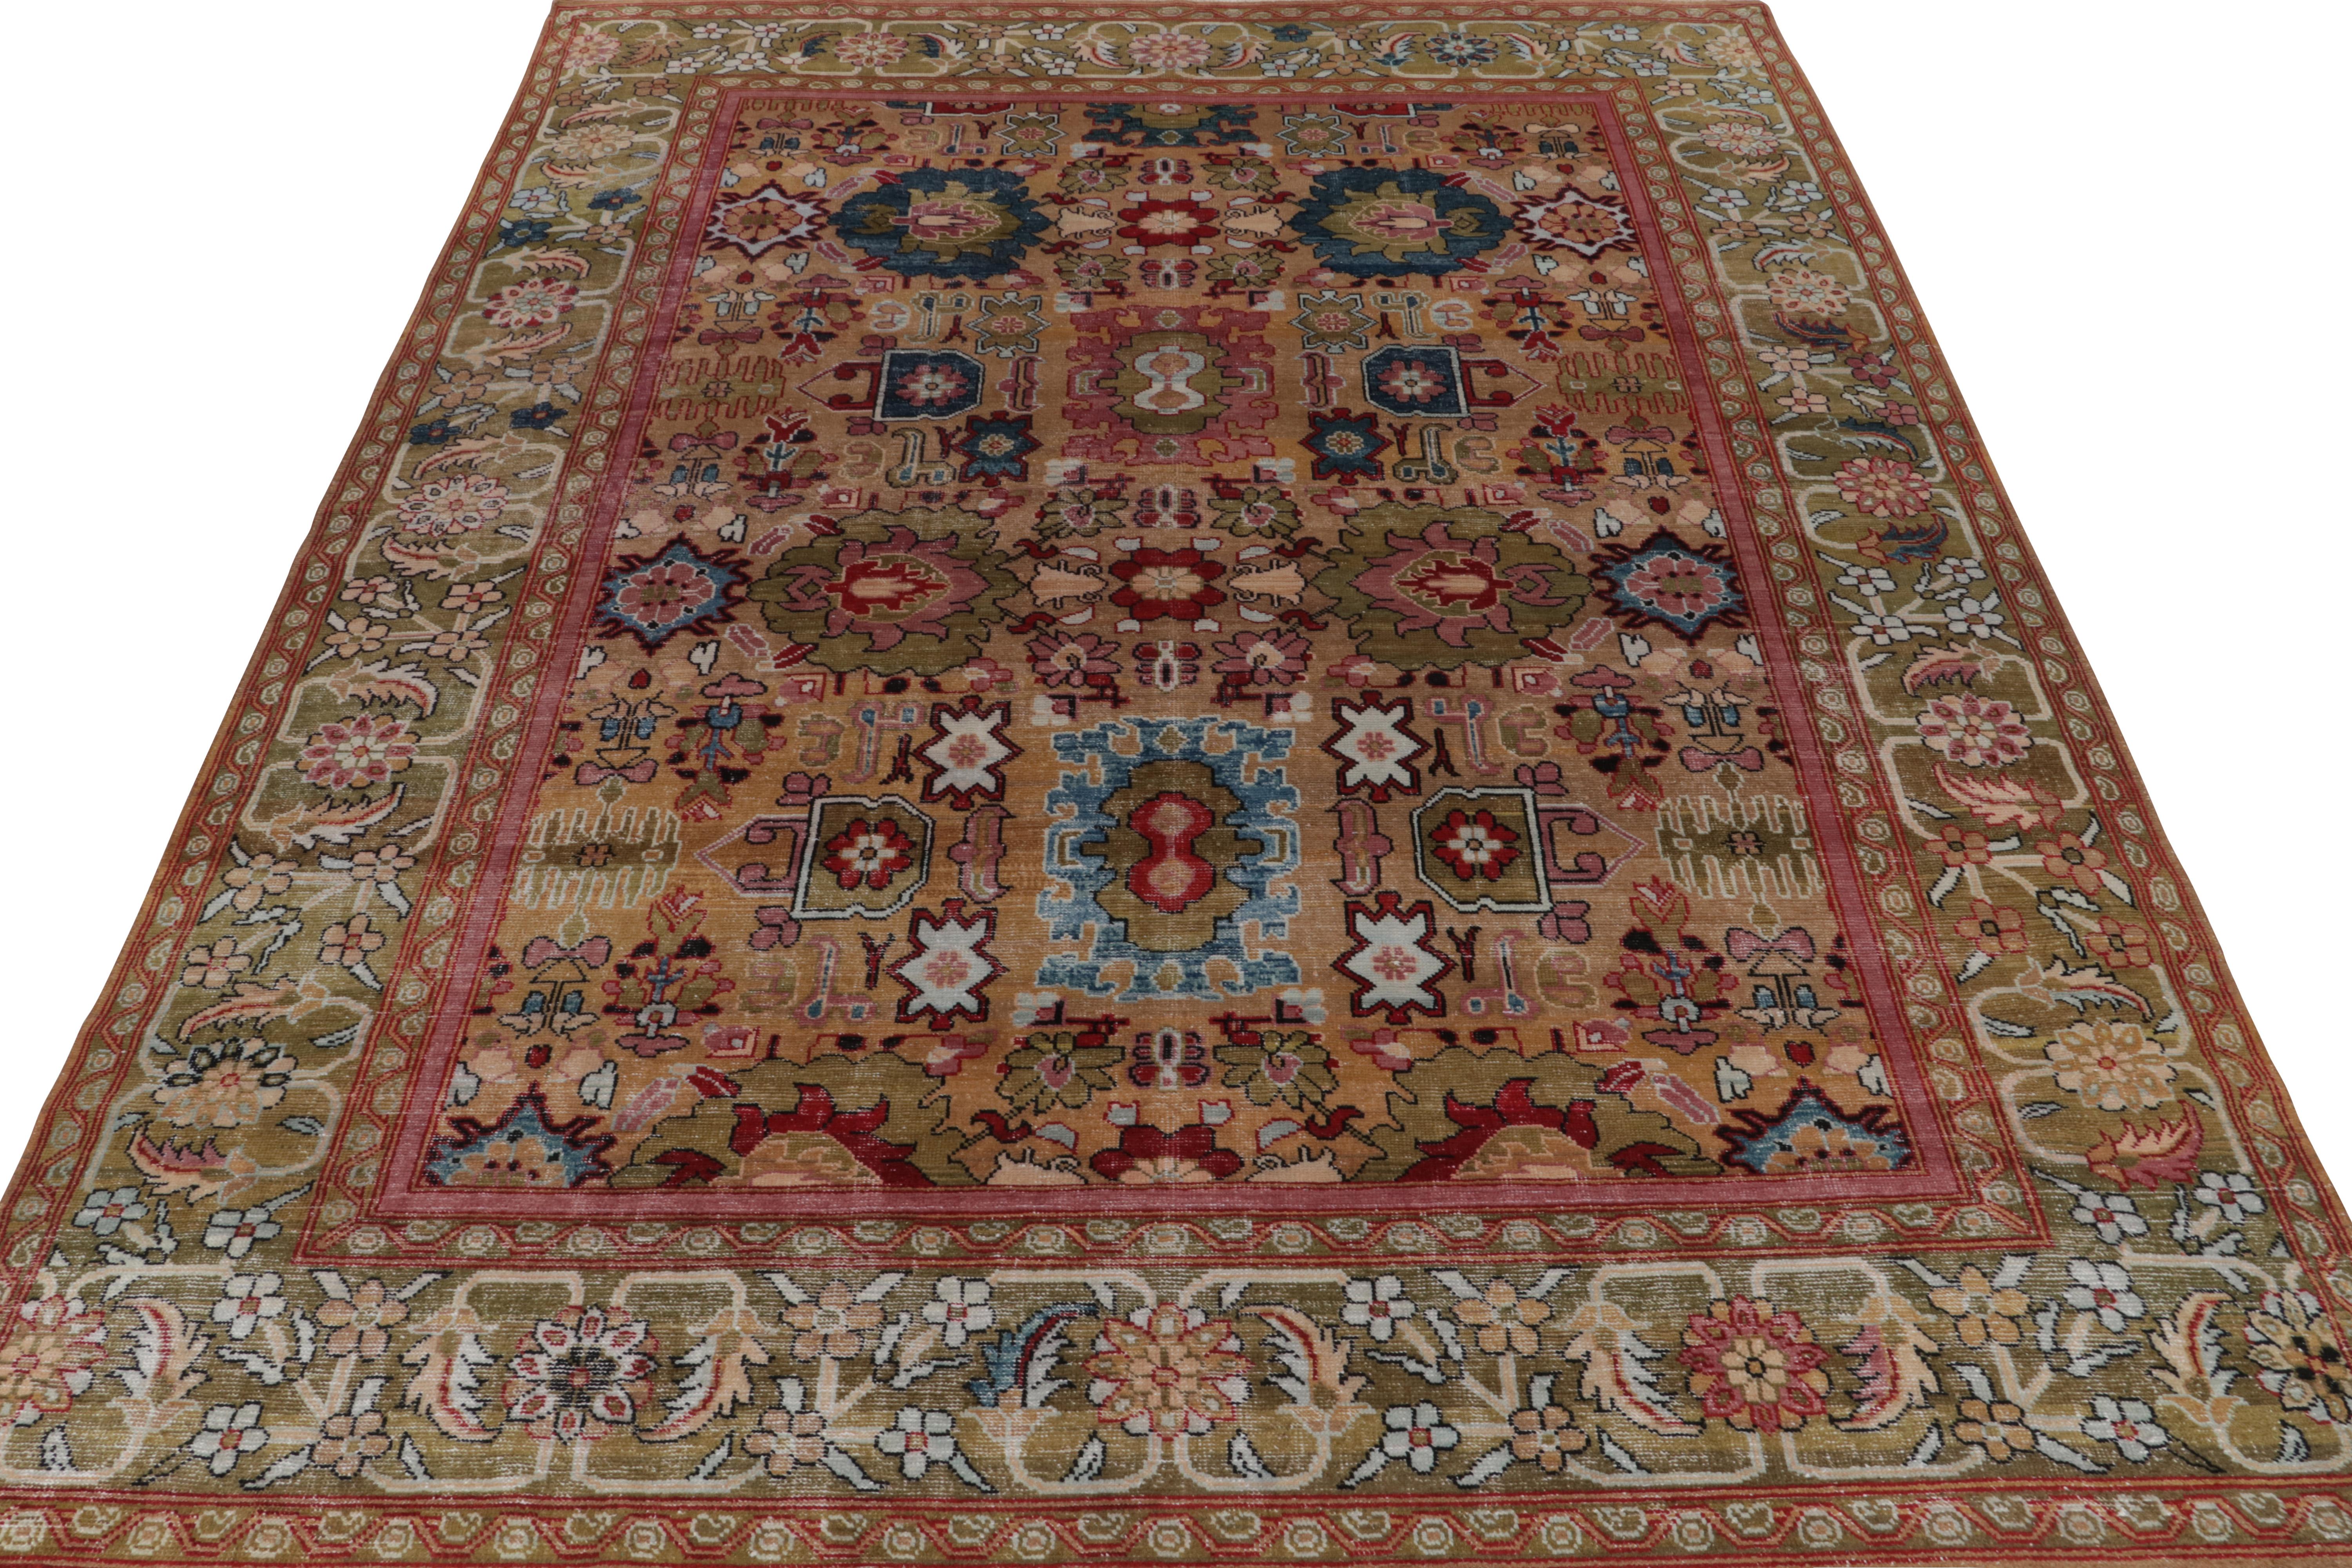 Indian Rug & Kilim’s Classic Oushak style rug in Pink, Blue and Brown Floral Patterns For Sale